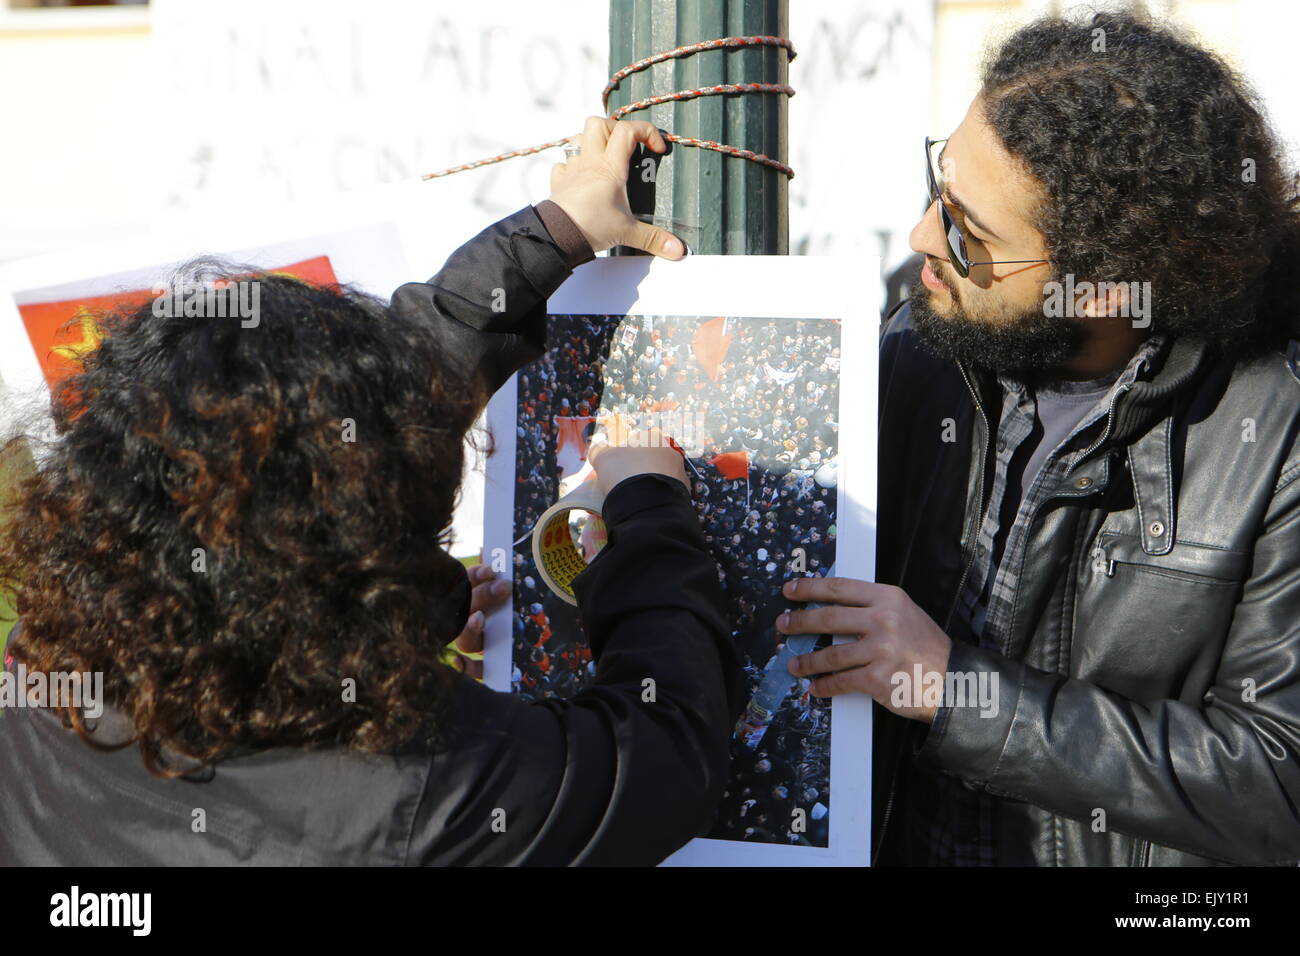 Athens, Greece. 2nd April 2015. A protester puts a picture from the funeral of 15 year old Berkin Elvan, who died after behind hid by a tear gas canister from the police, on to a lamp post. A handful of protesters showed their solidarity with the two killed activists who had taken a prosecutor hostage in a Istanbul court house. They were calling for the truth in the killing of 15 year old Berkin Elvan who died during the Gezi protests after being hit by a tear gas canister from the police. Credit:  Michael Debets/Alamy Live News Stock Photo